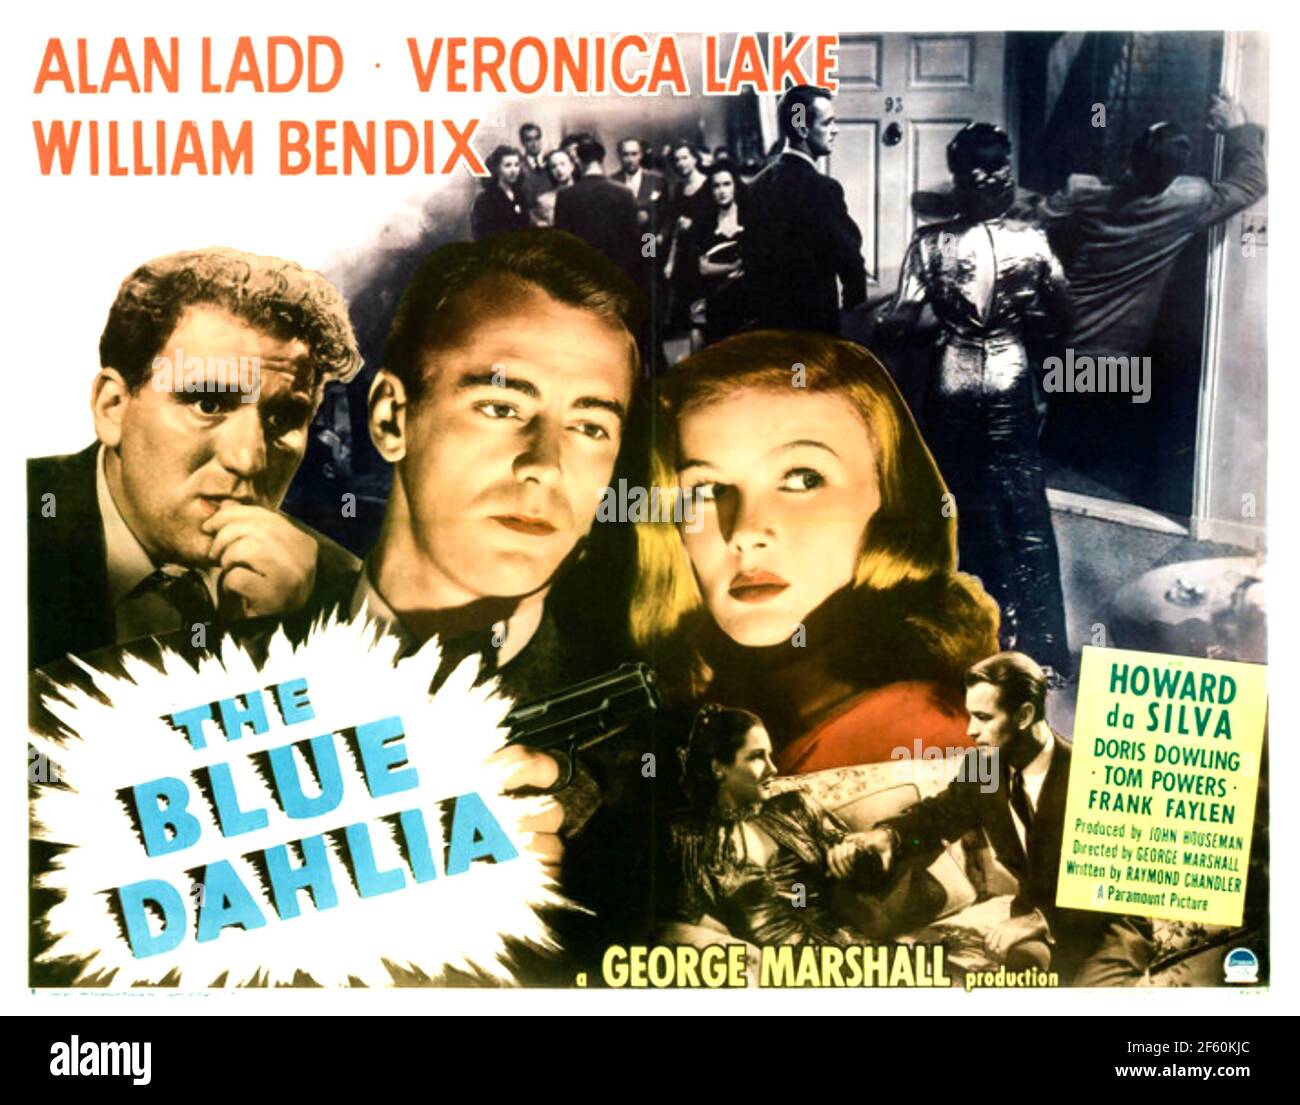 THE BLUE DAHLIA 1946 Paramount Pictures film with Alan Ladd and Veronica Lake Stock Photo